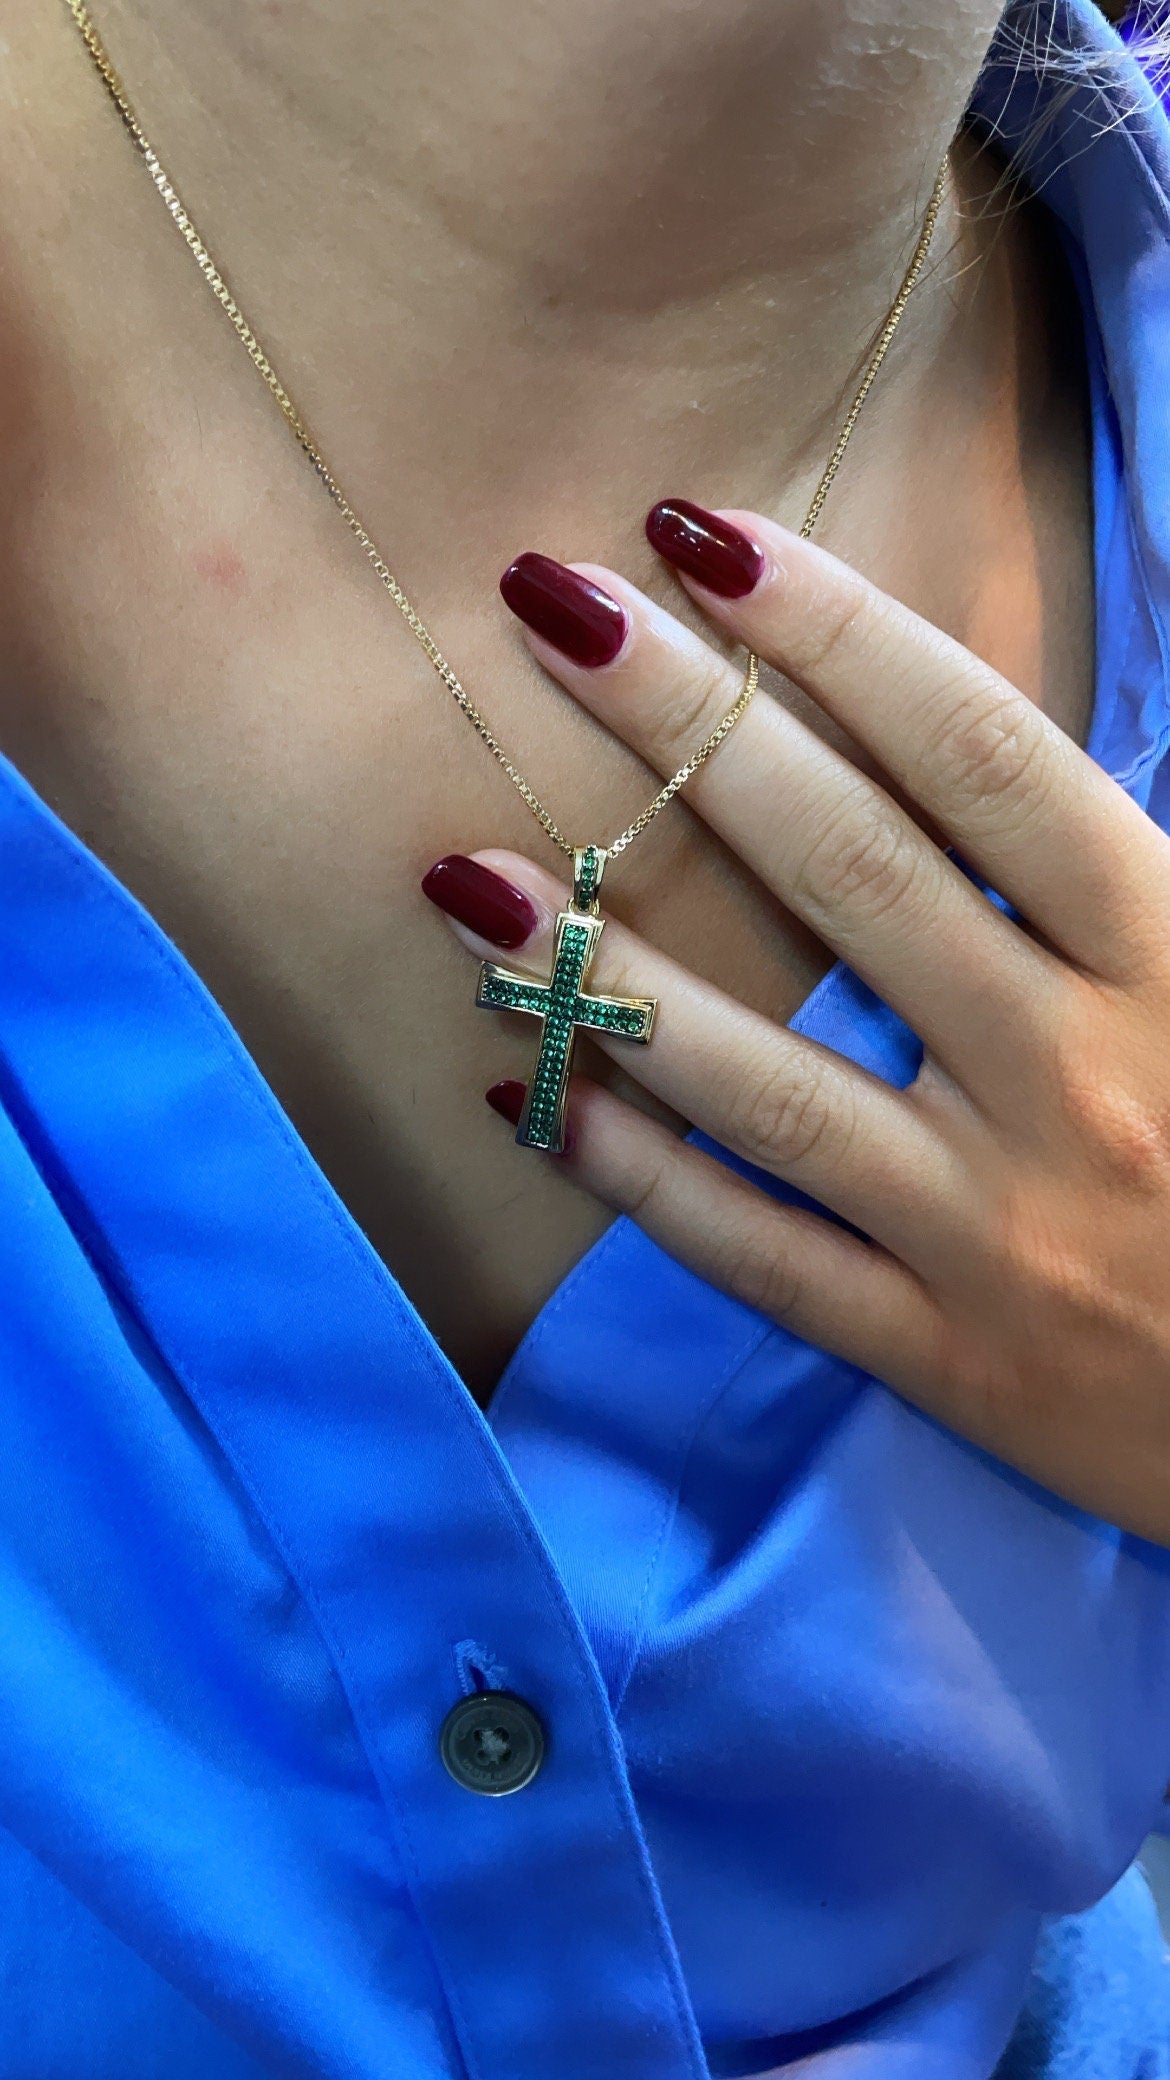 18k Gold Layered Colorful Cubic Zirconia Cross Pendant Charm, Religious Charm,